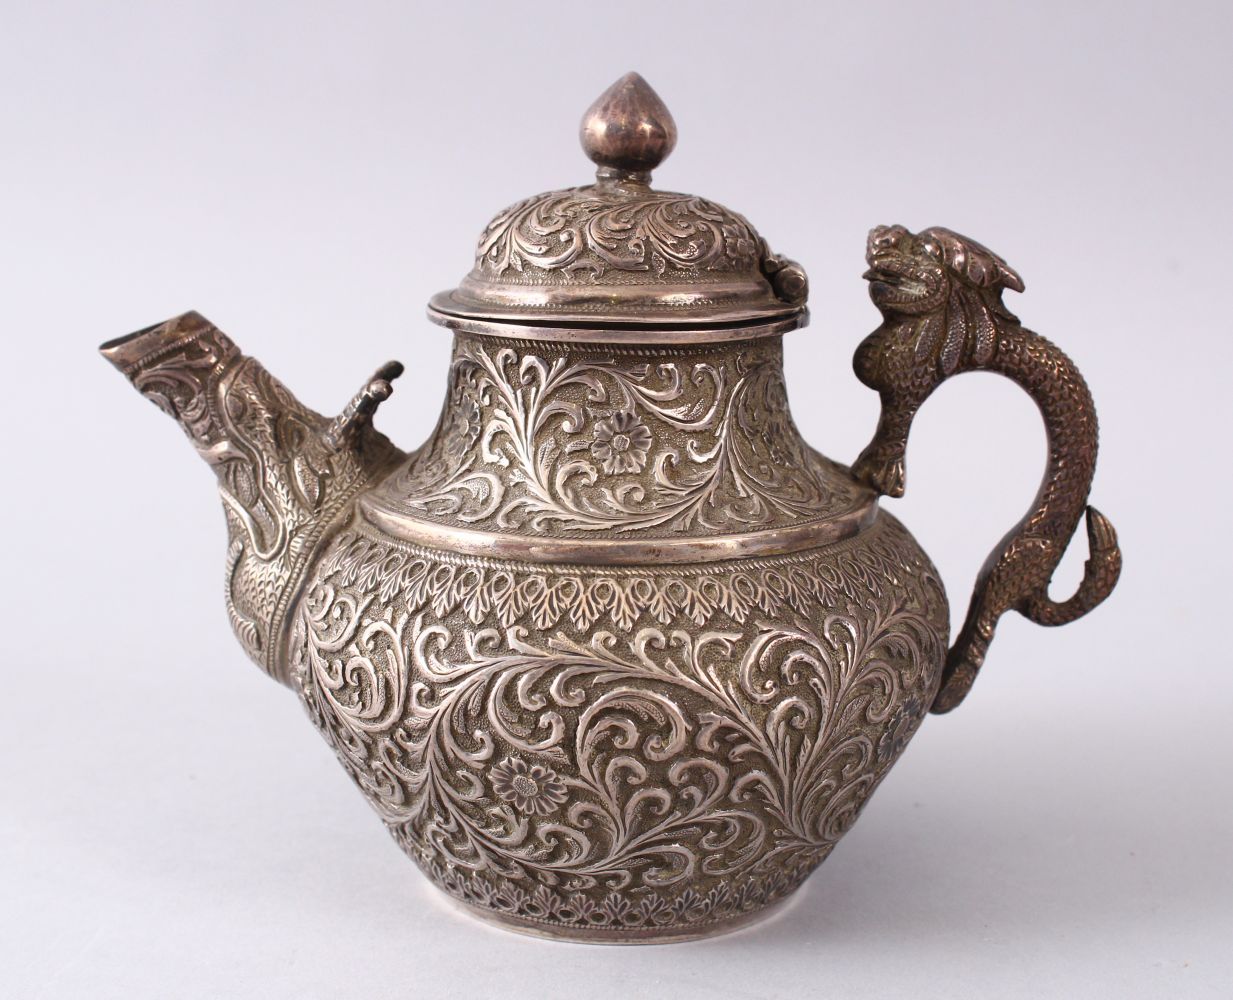 A GOOD 19TH CENTURY TURKISH SOLID SILVER TEAPOT carved with formal foliage and a dog style handle,